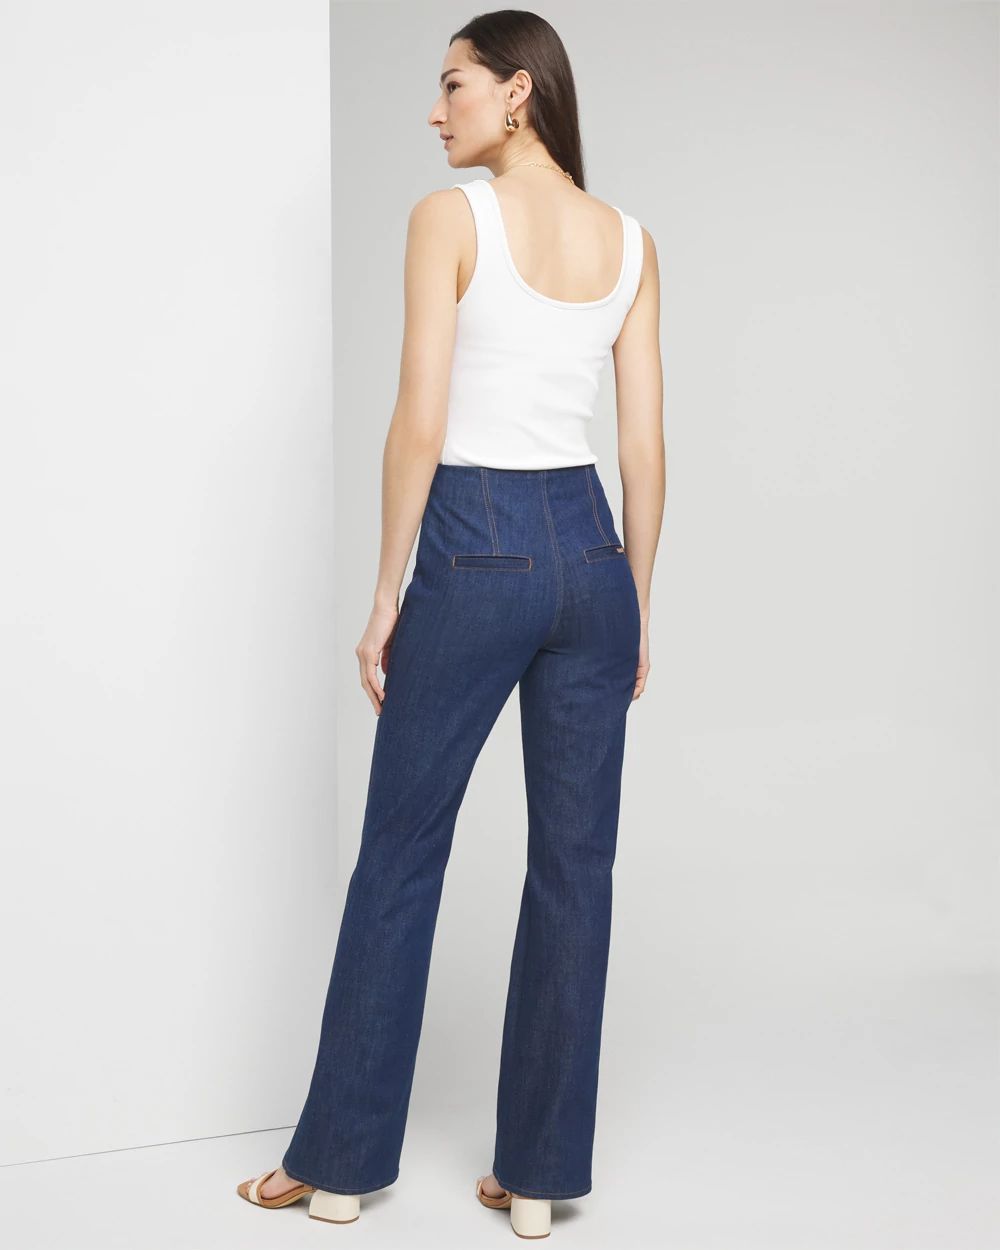 Extra High-Rise Sculpt Denim Trouser click to view larger image.